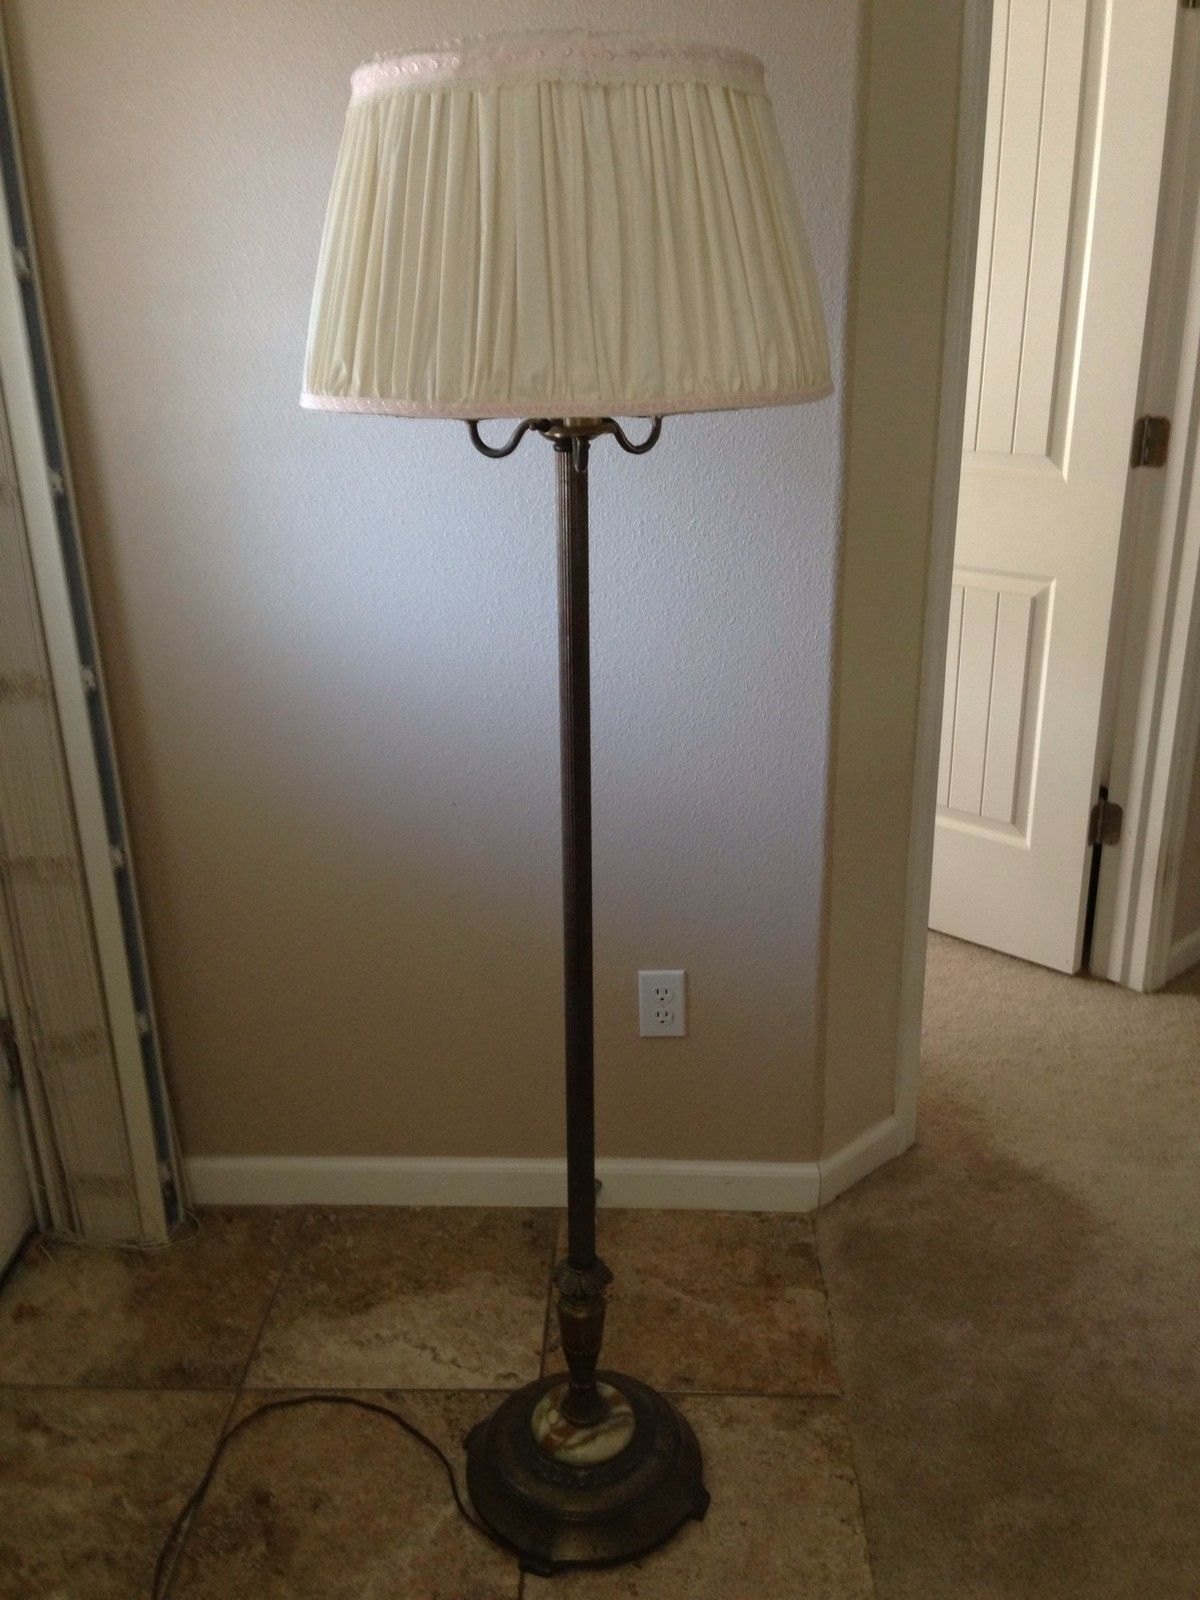 Antique Candelabra Torchiere Floor Lamp With Marble Base inside size 1200 X 1600